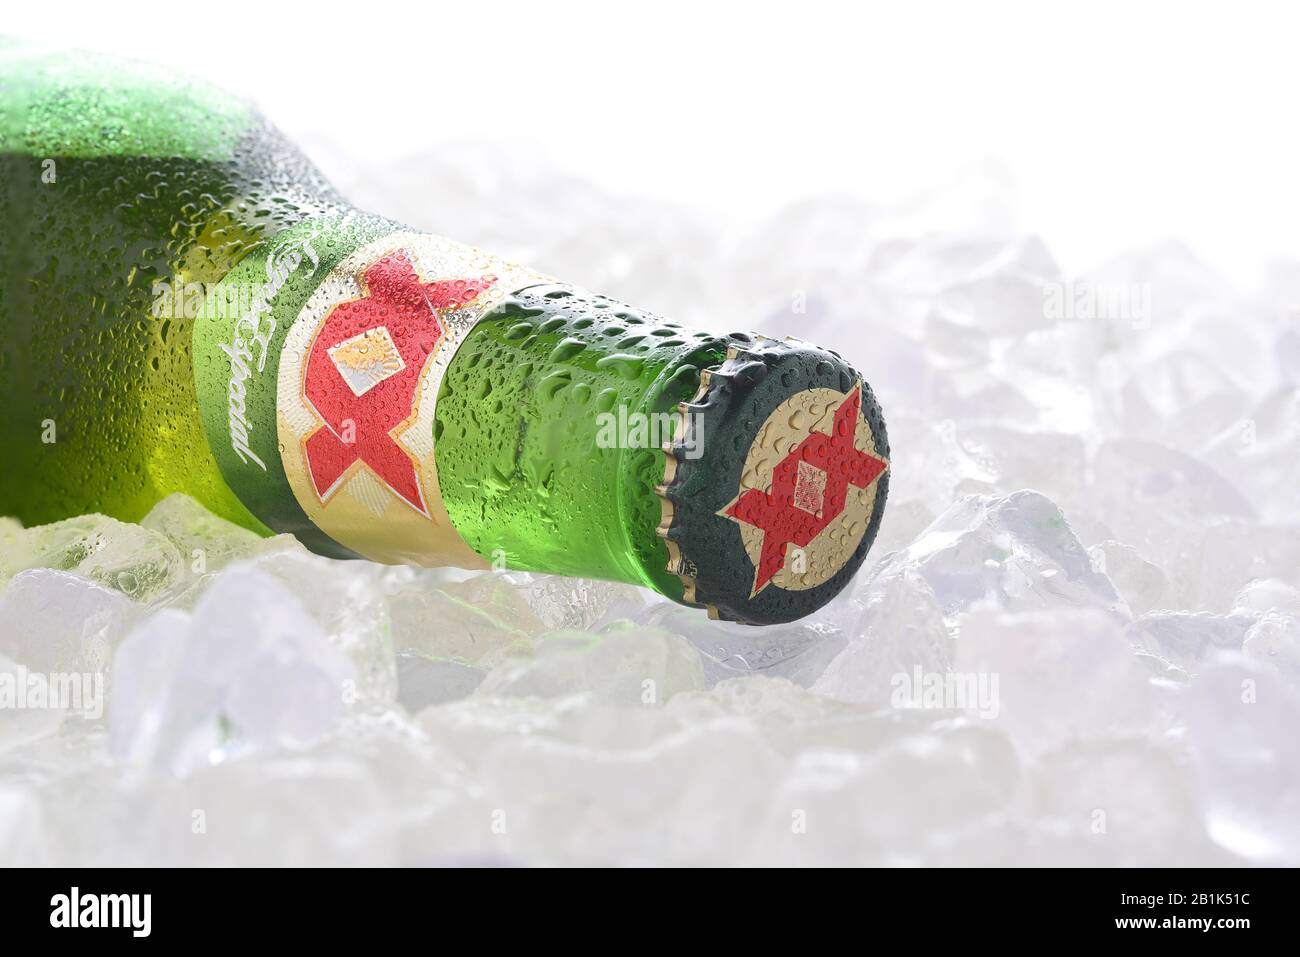 IRVINE, CA - JUNE 14, 2017: Dos Equis Blanca on ice. A single bottle of the popular beer from Cuauhtemoc-Moctezuma Brewery in Monterrey, Mexico a subs Stock Photo